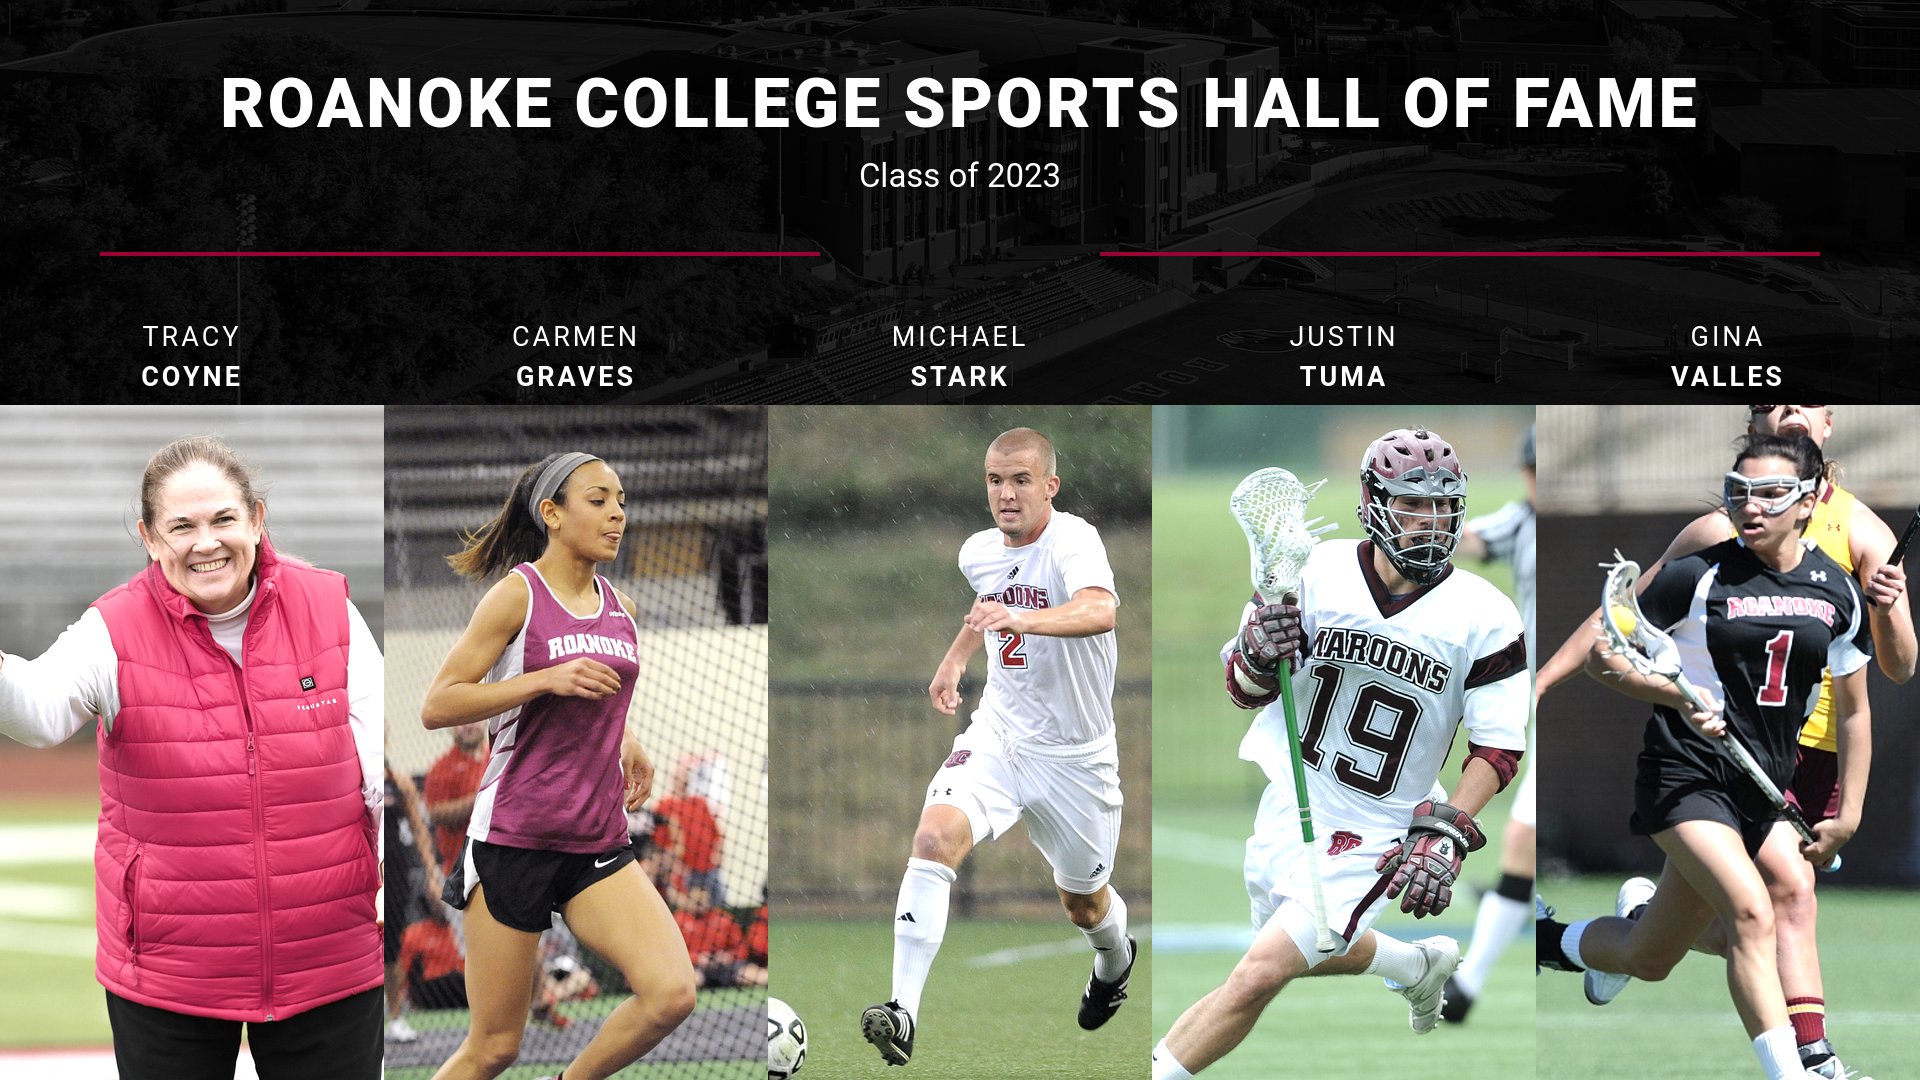 Roanoke Announces the Sports Hall of Fame Class of 2023 Inductees